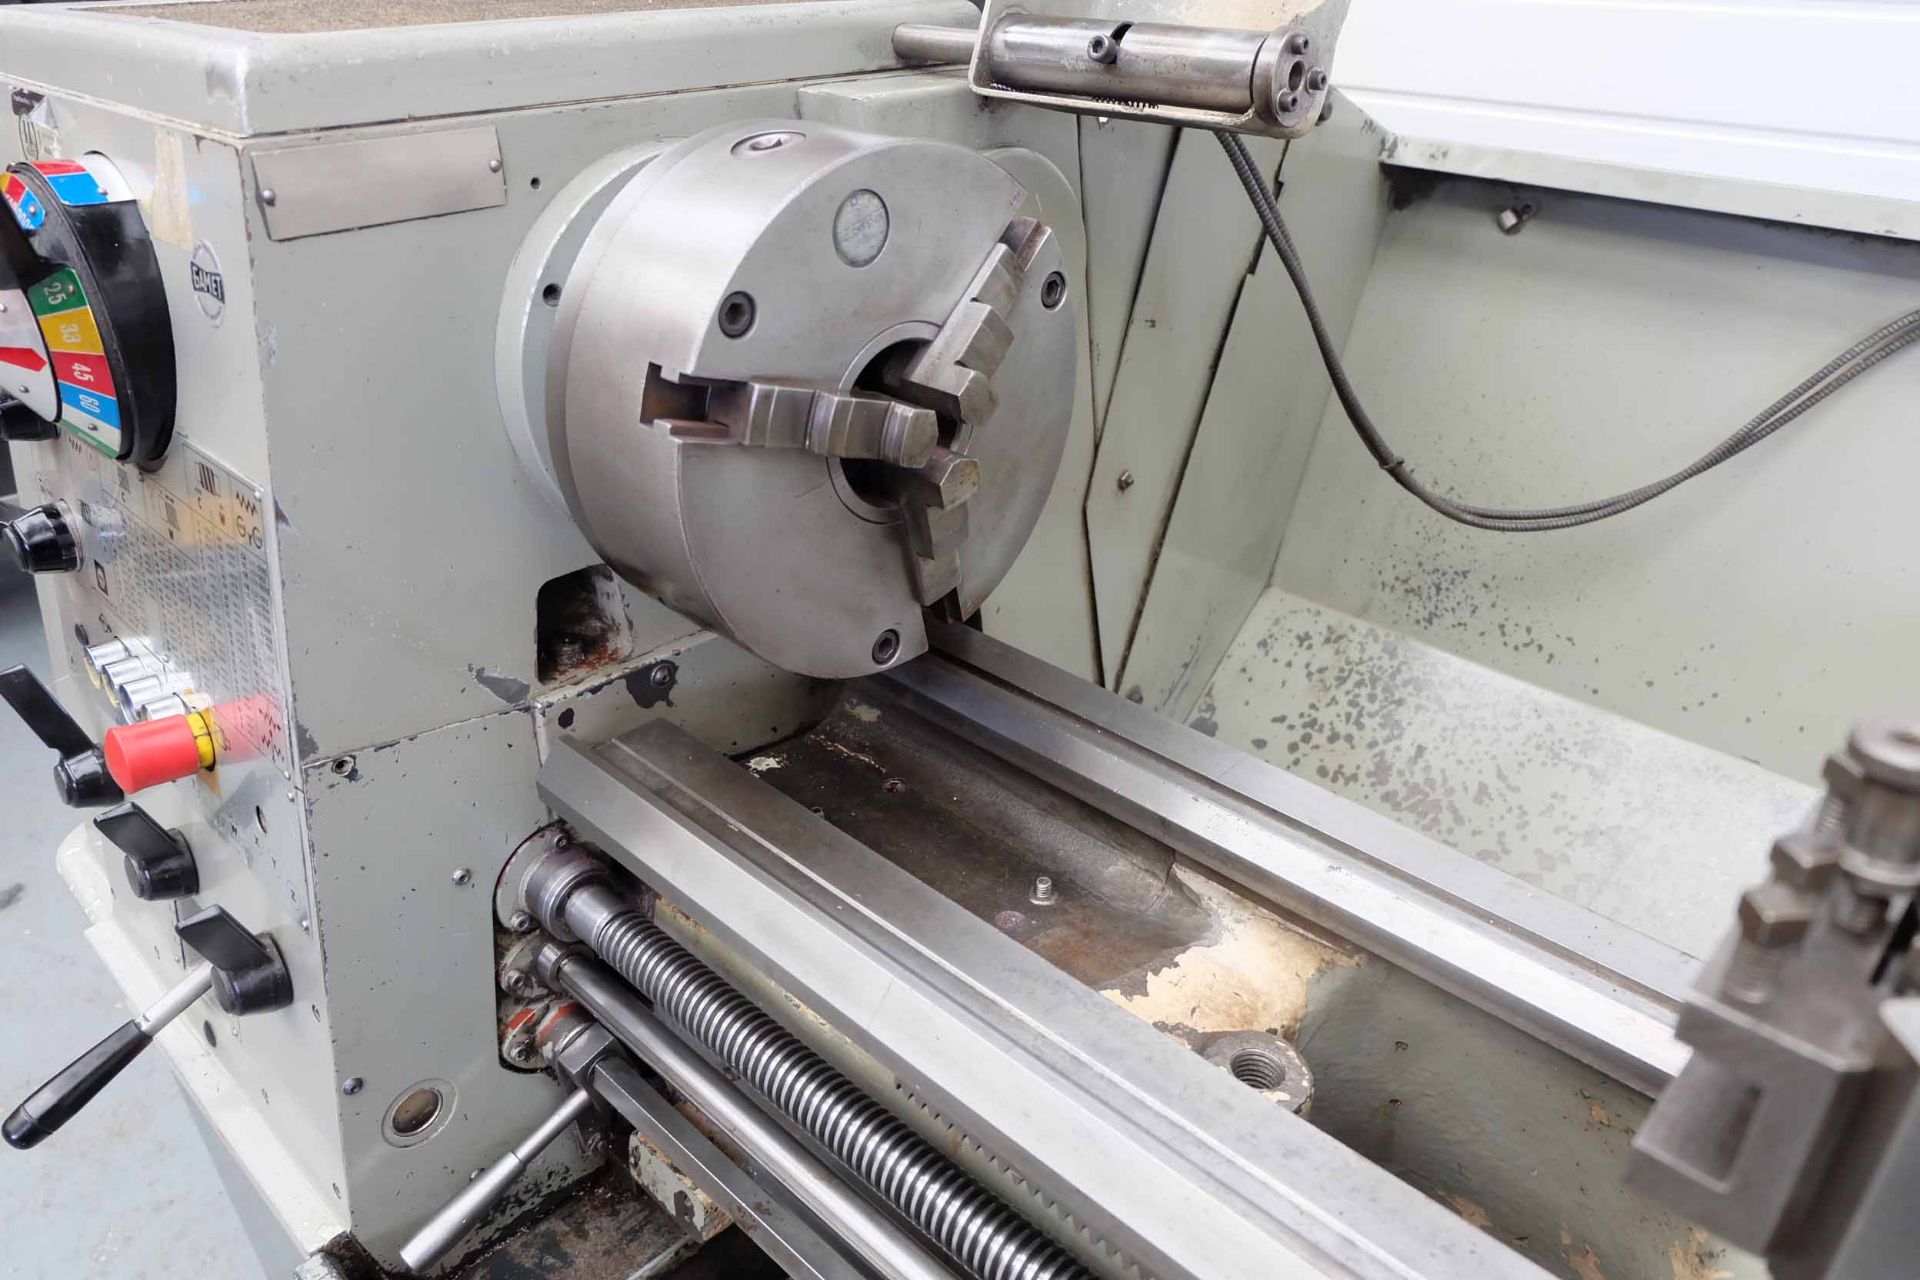 Colchester Triumph 2000 Gap Bed Centre Lathe. Admits Between Centres 50". Swing Over Bed 15 1/4". Sw - Image 5 of 10